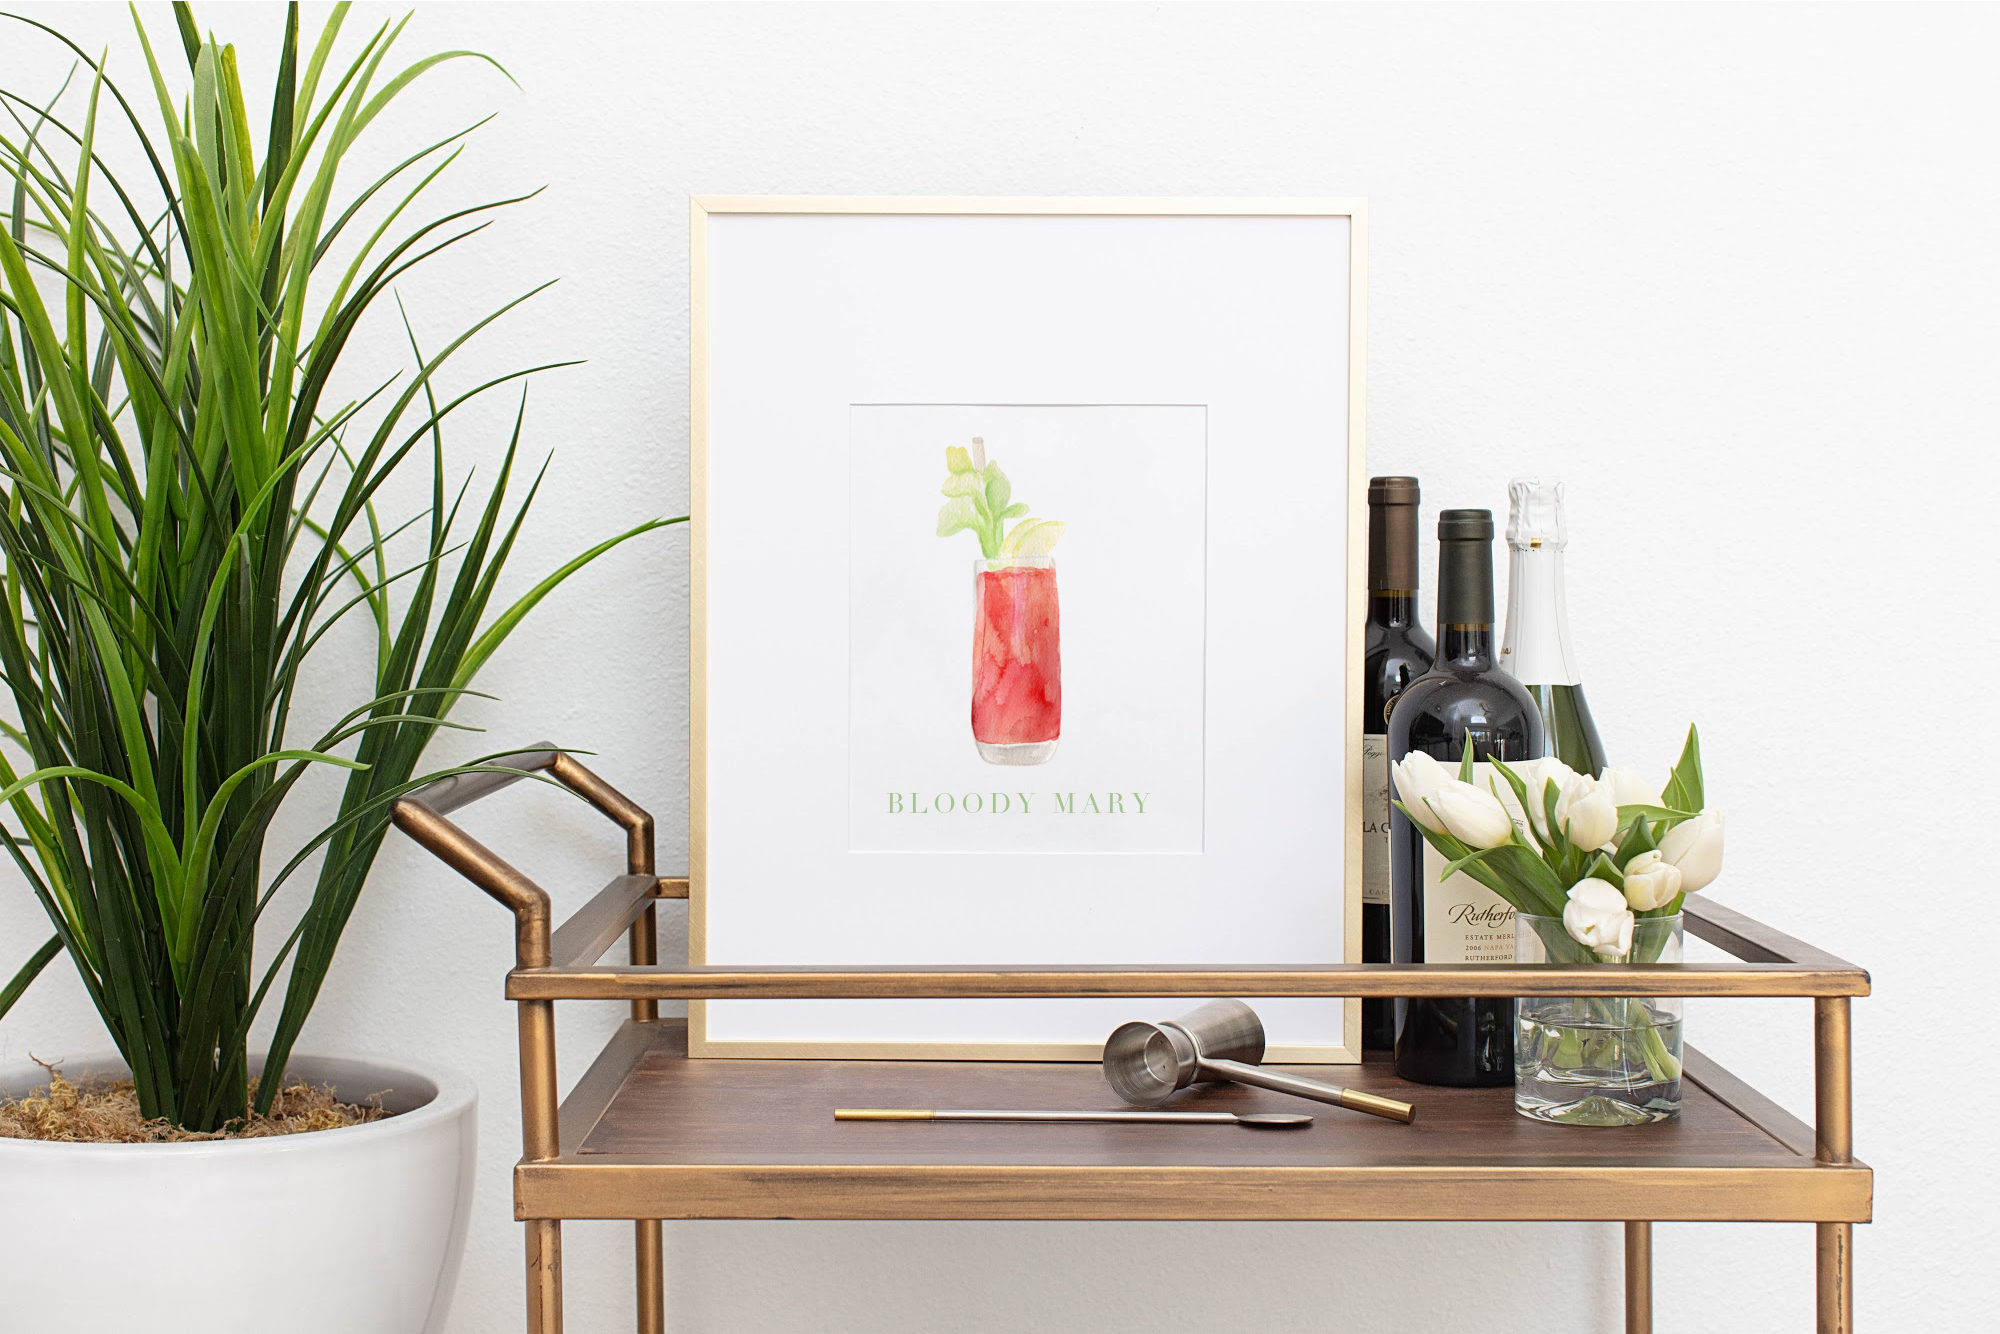 A watercolor painting of a Bloody Mary by Alicia Betz of The Welcoming District.